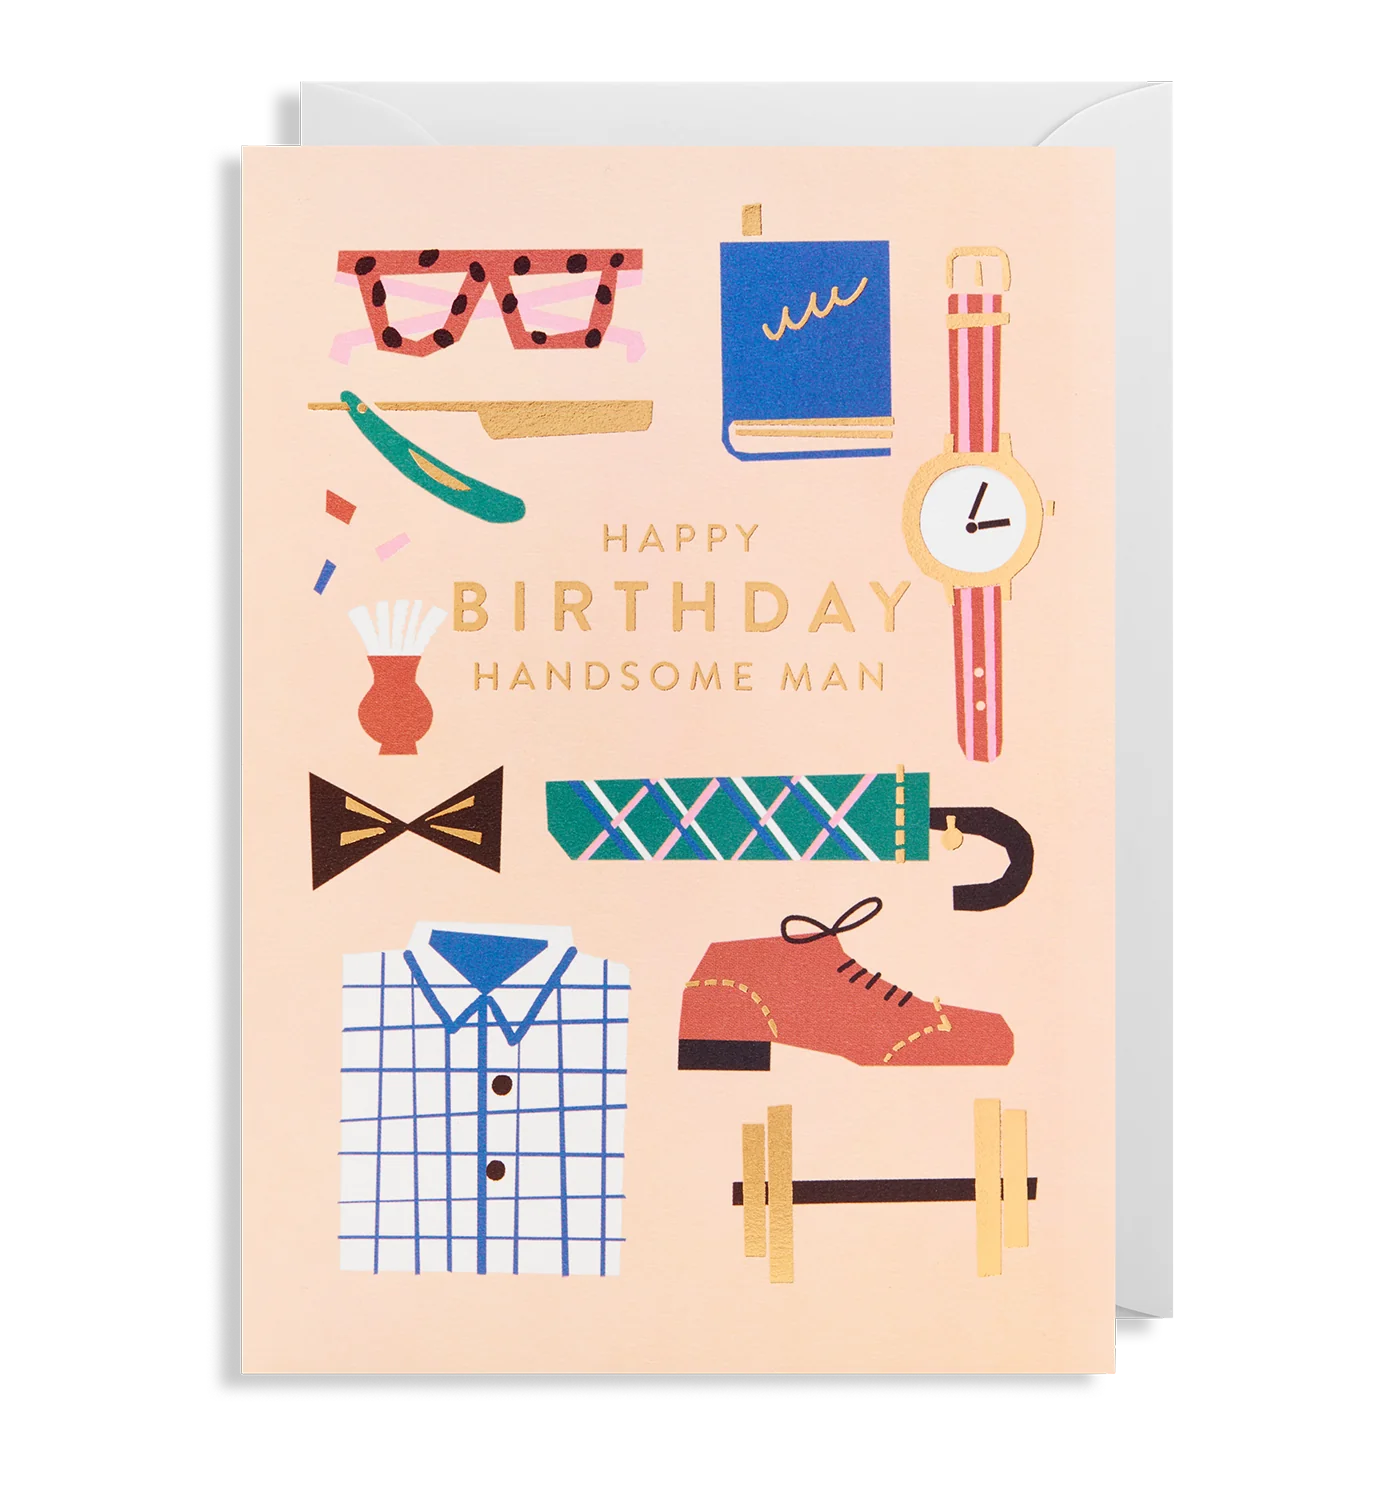 Handsome Man Things Birthday Card by Ekaterina Trukhan